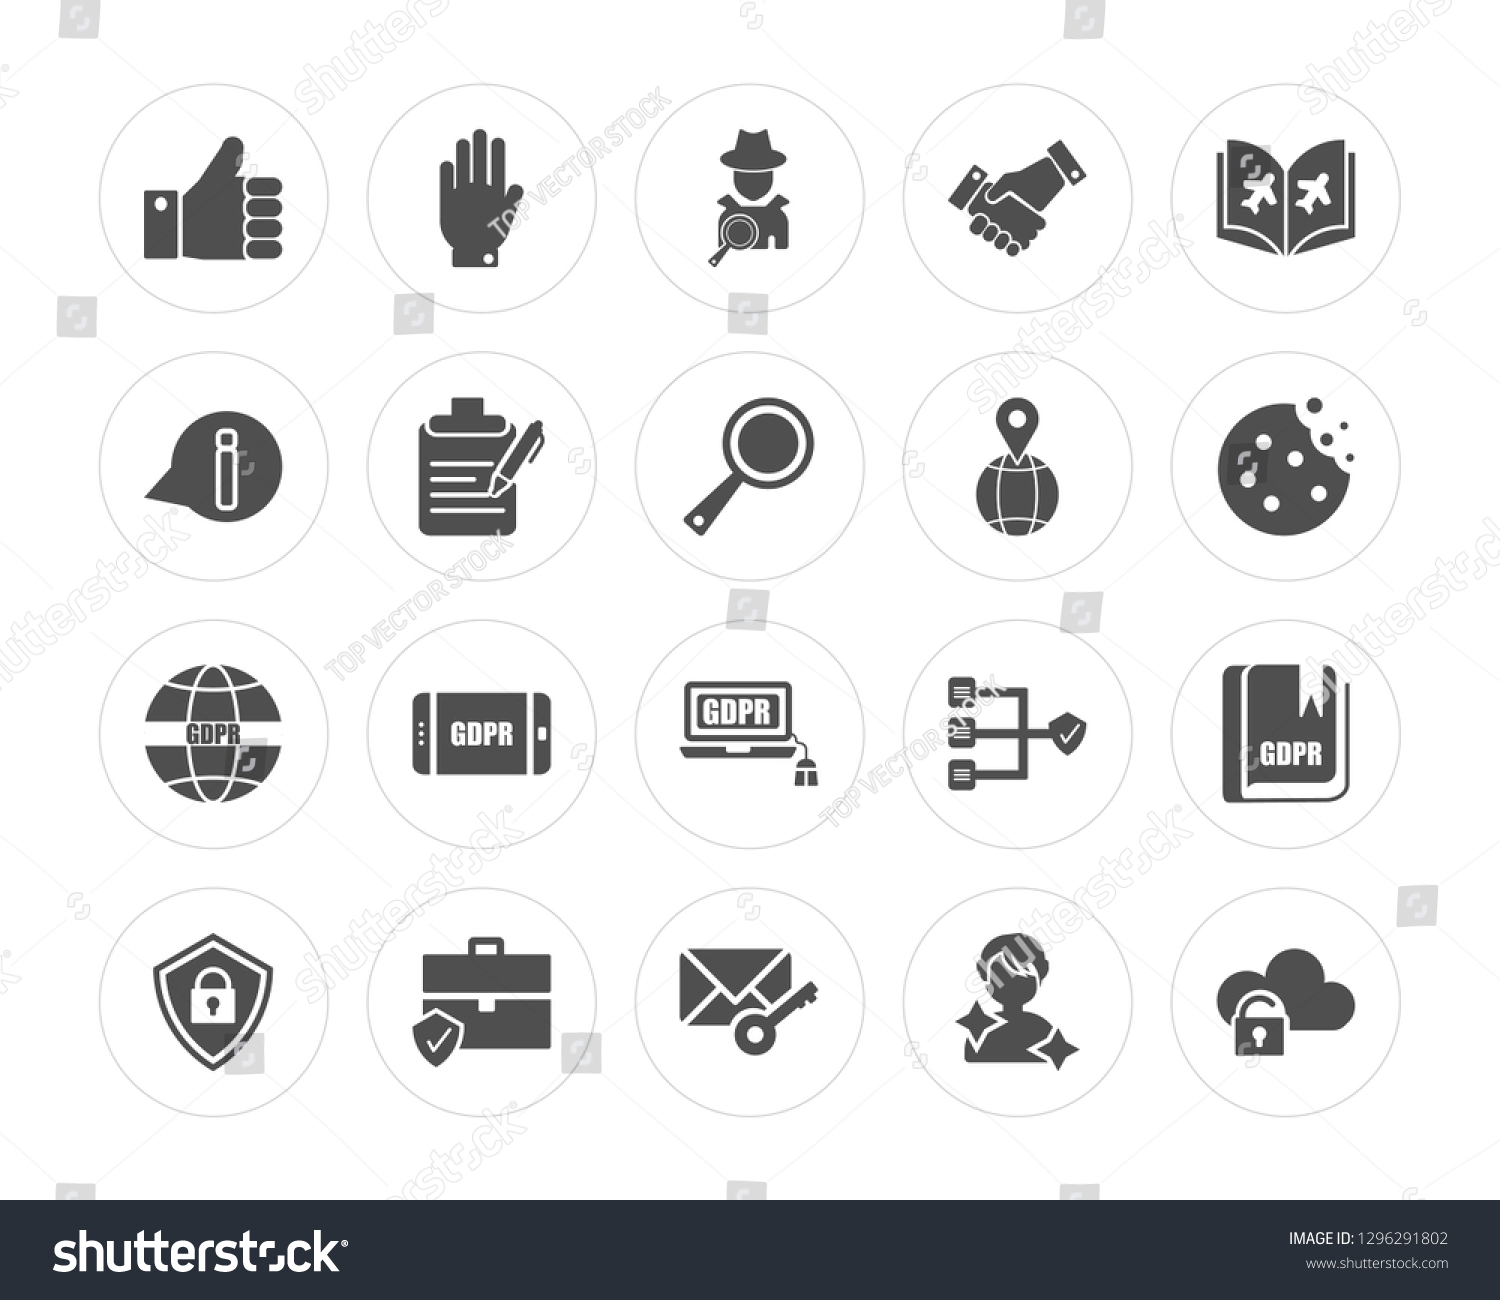 SVG of 20 Right to objection, Letter, Portfolio, Shield, Plain, Address, GDPR, Consent modern icons on round shapes, vector illustration, eps10, trendy icon set. svg